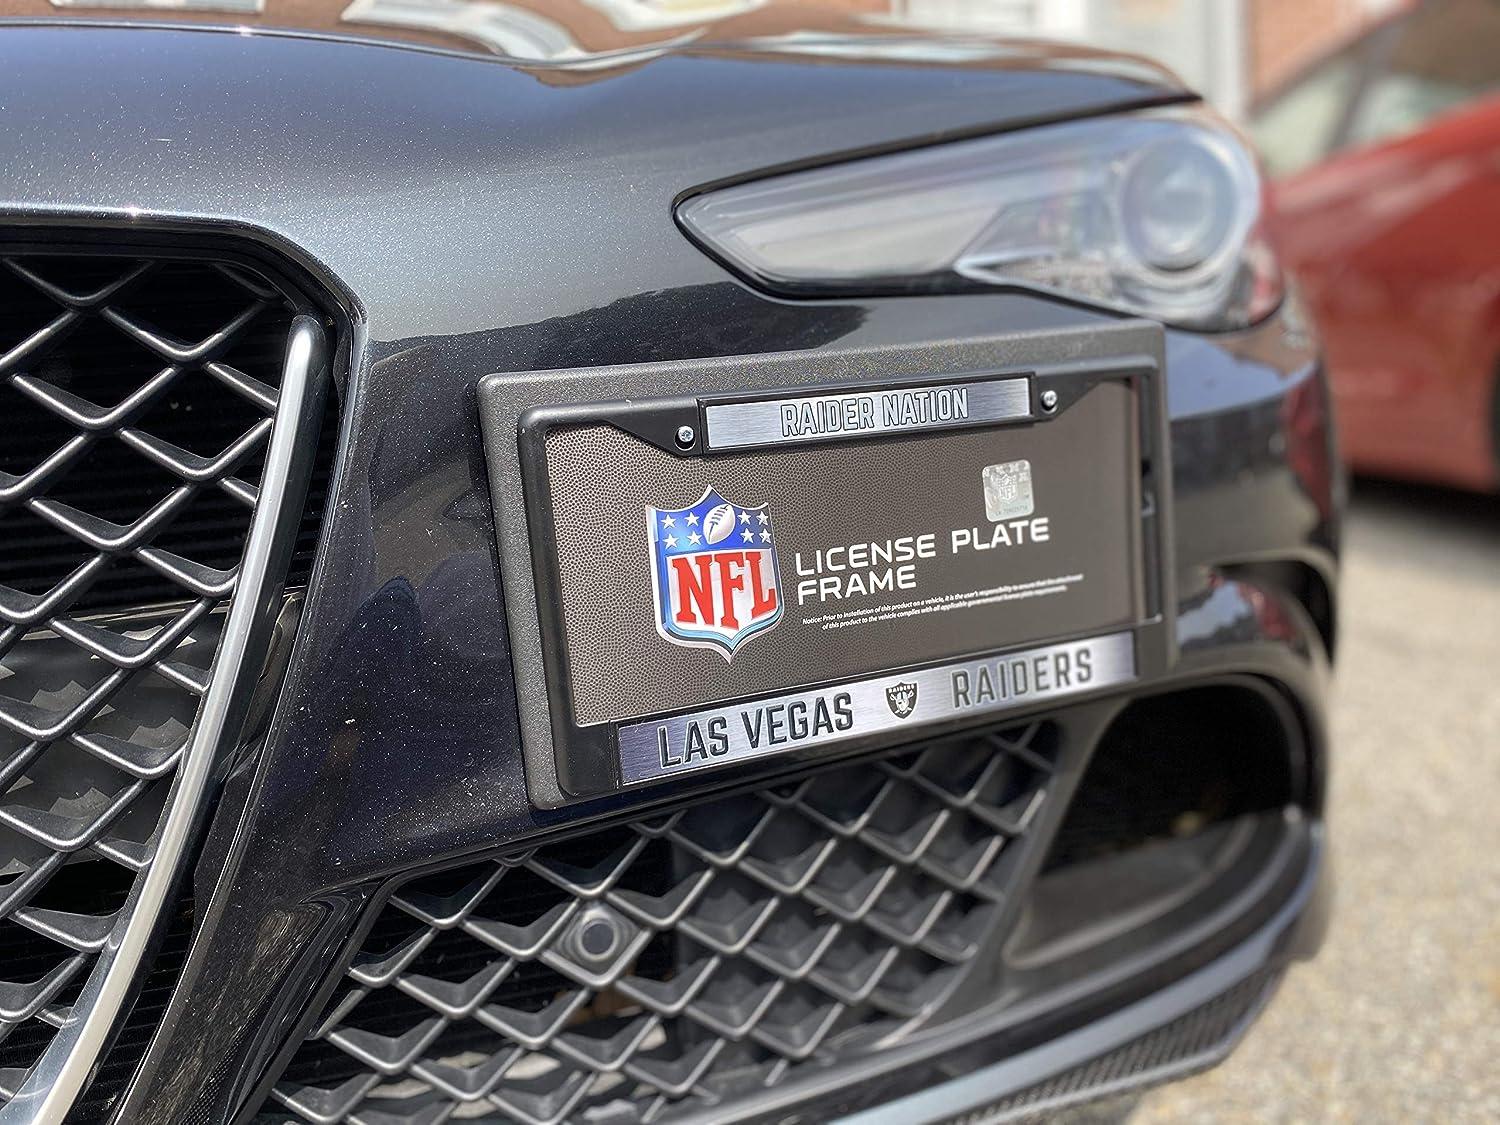  Las Vegas Raiders NFL Premium Chrome Zinc Alloy Team License  Plate Frame - 4 Screw Tag Holder with Graffiti Style Lettering - Chrome  Background and Team Colors Complement Any Color Truck